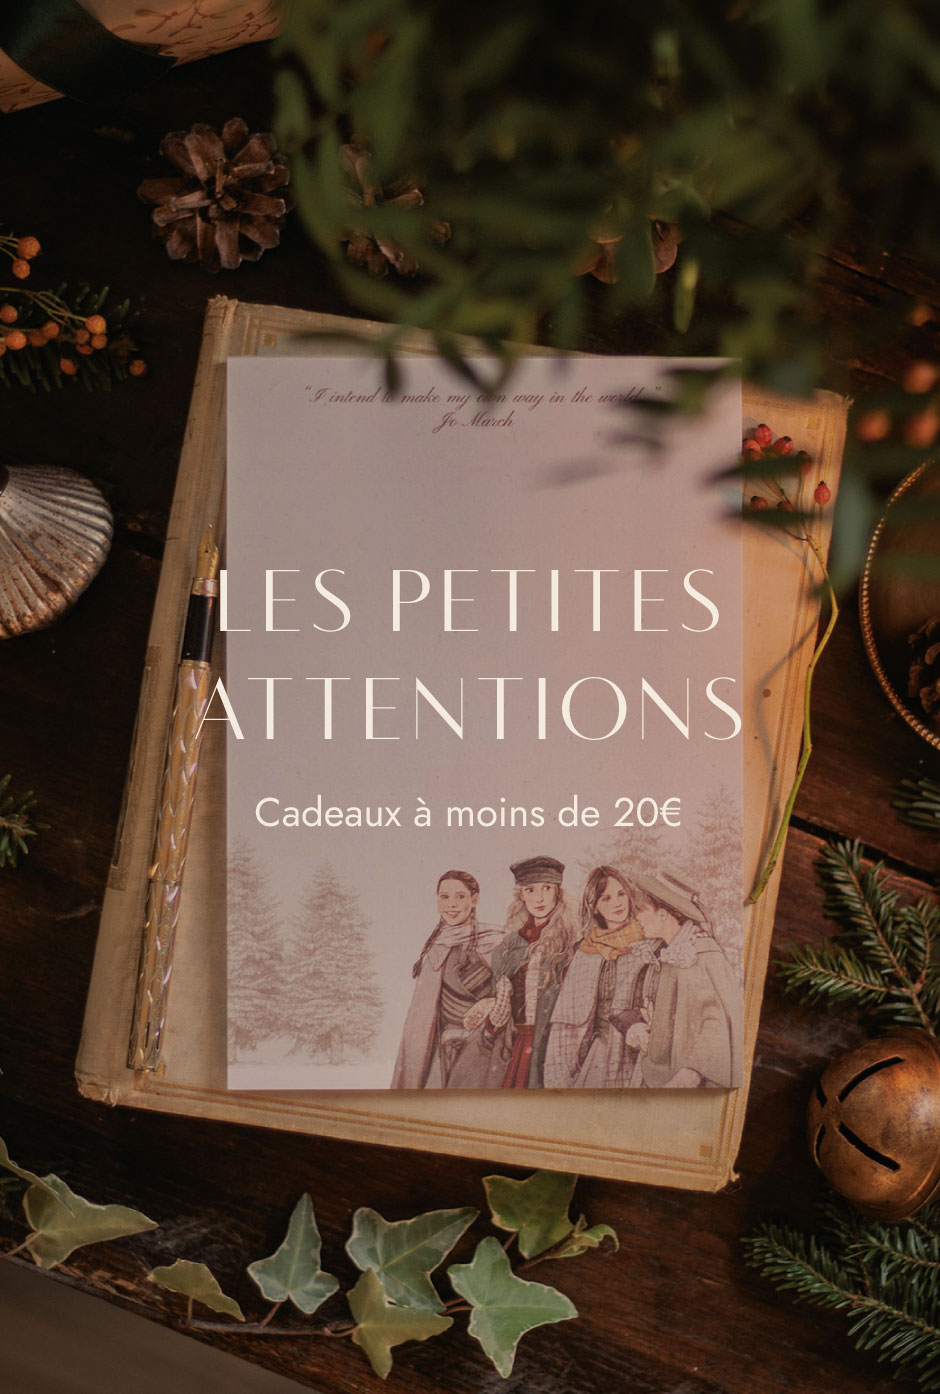 Petites-attentions